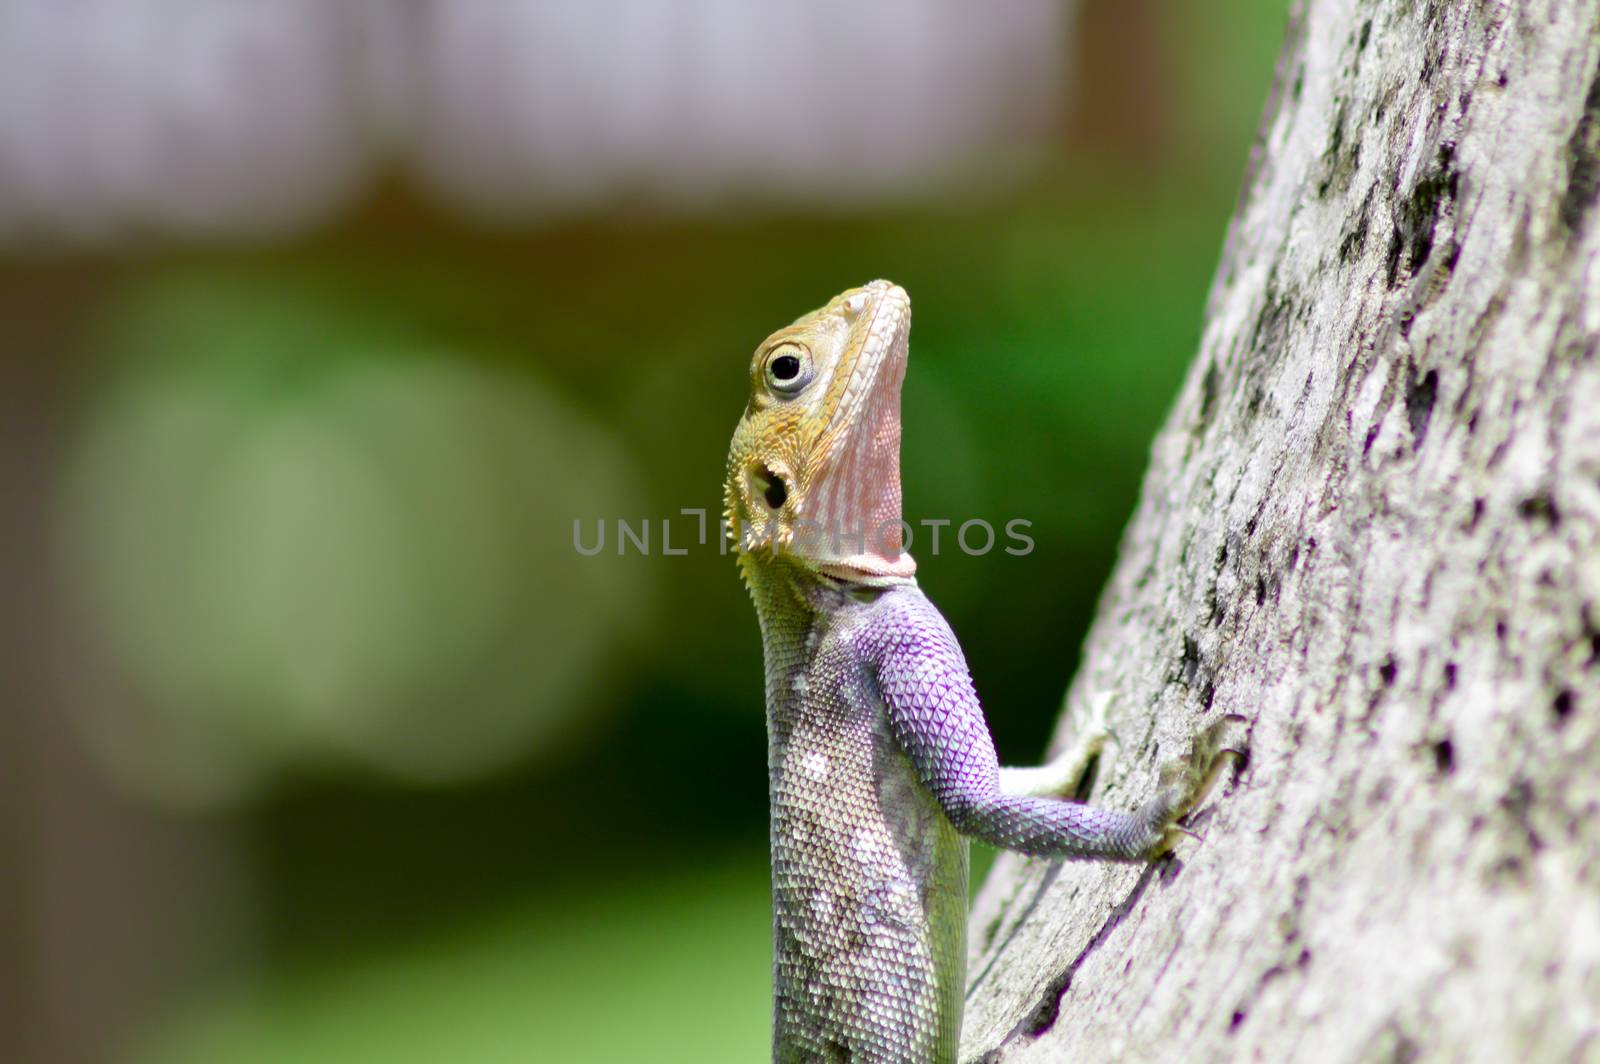 Lizard of all colors on a trunk  by Philou1000